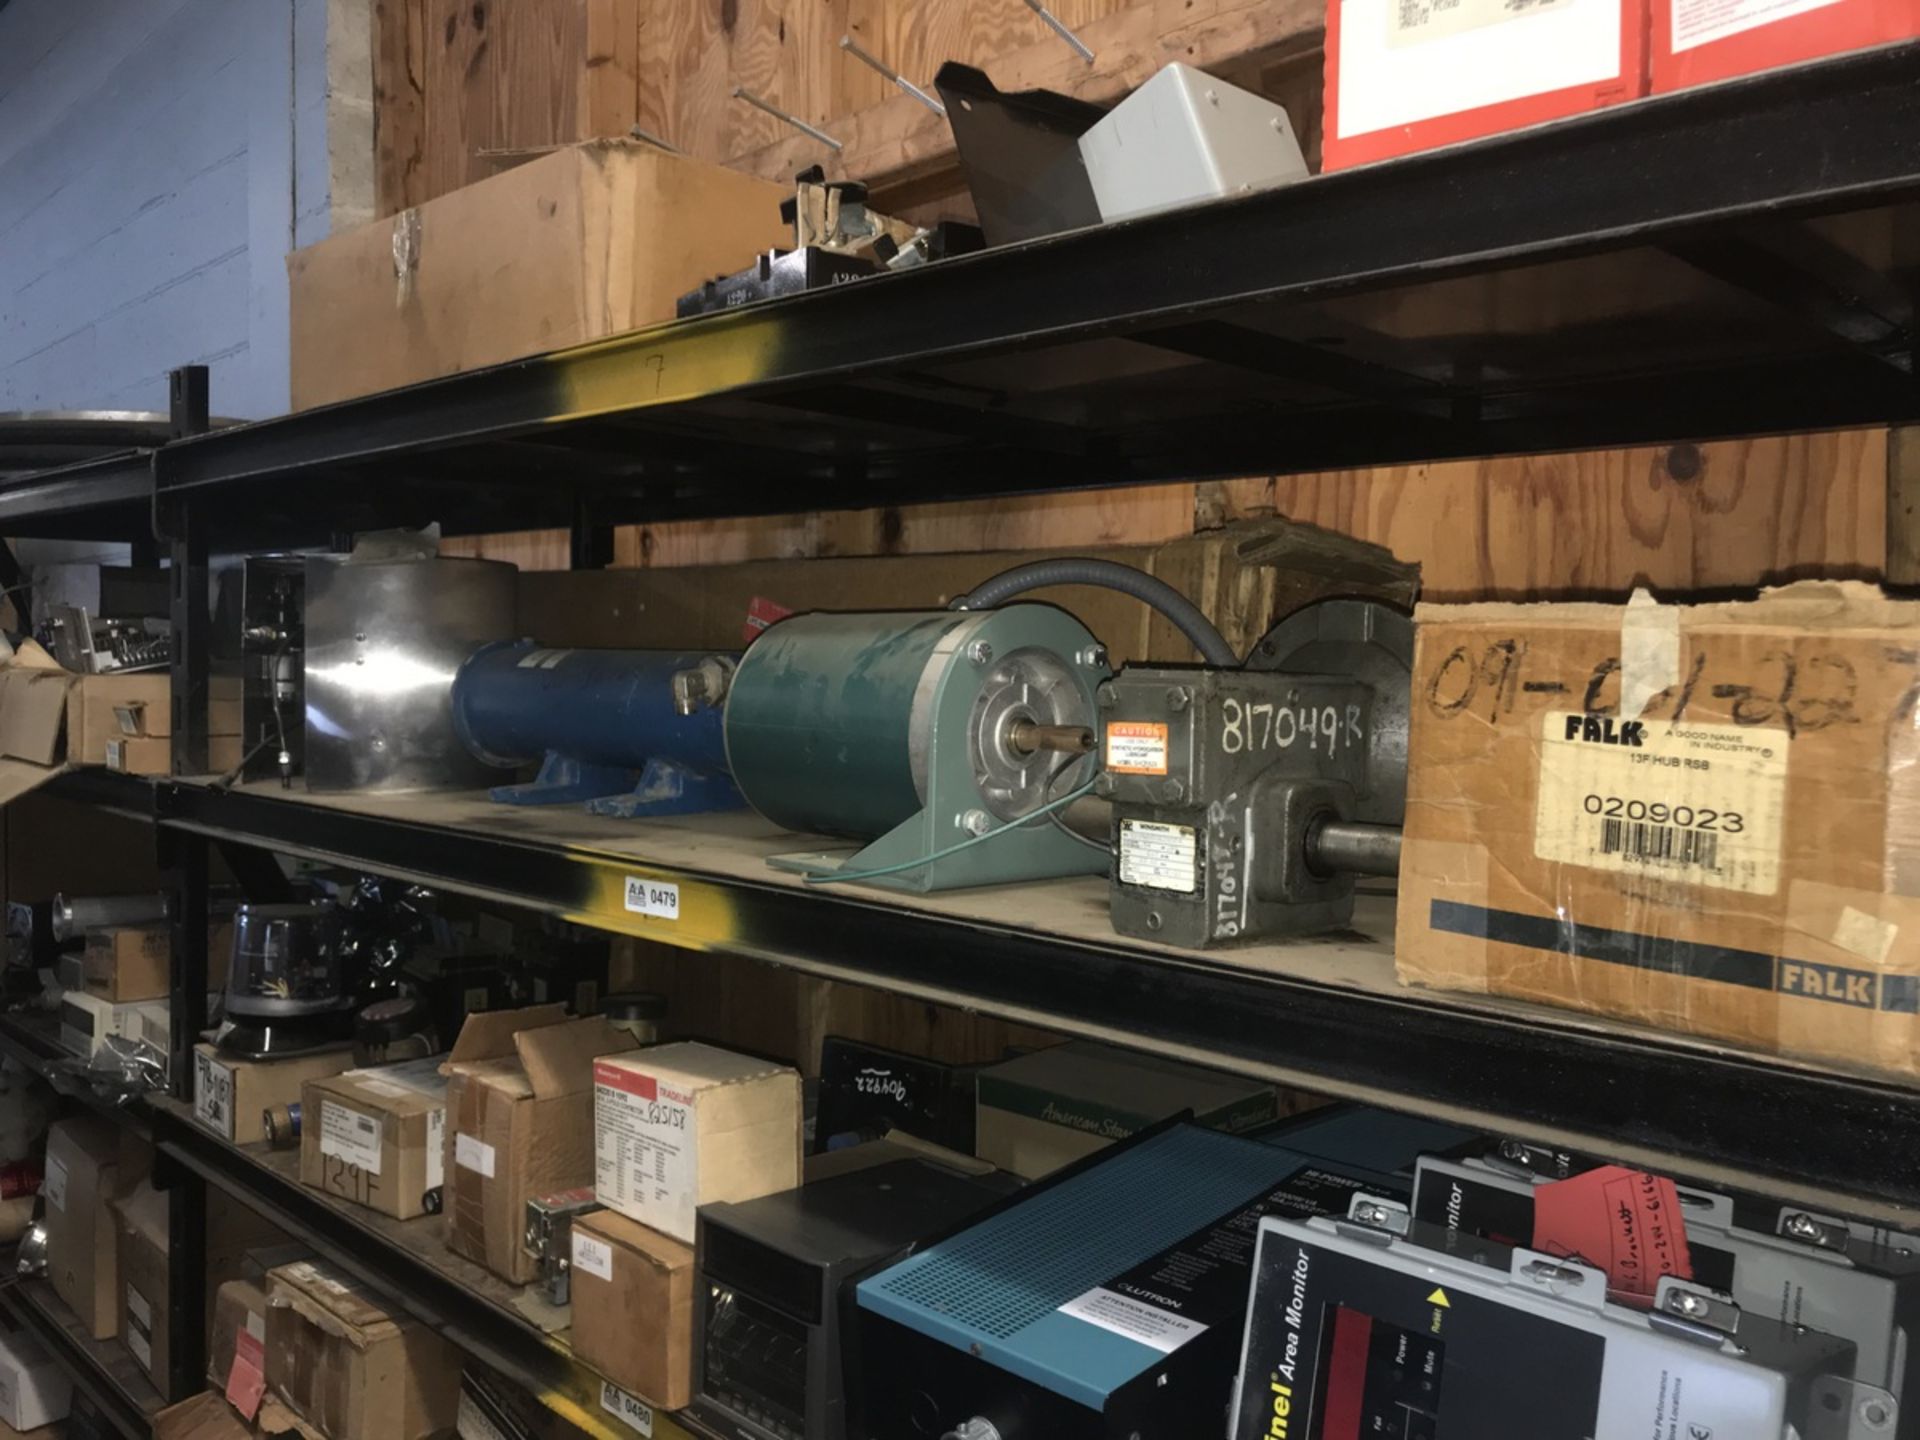 Contents of Shelf including Compressed Air Dryer Filter, Motors, Gear Reducers and Hubs - Image 2 of 5